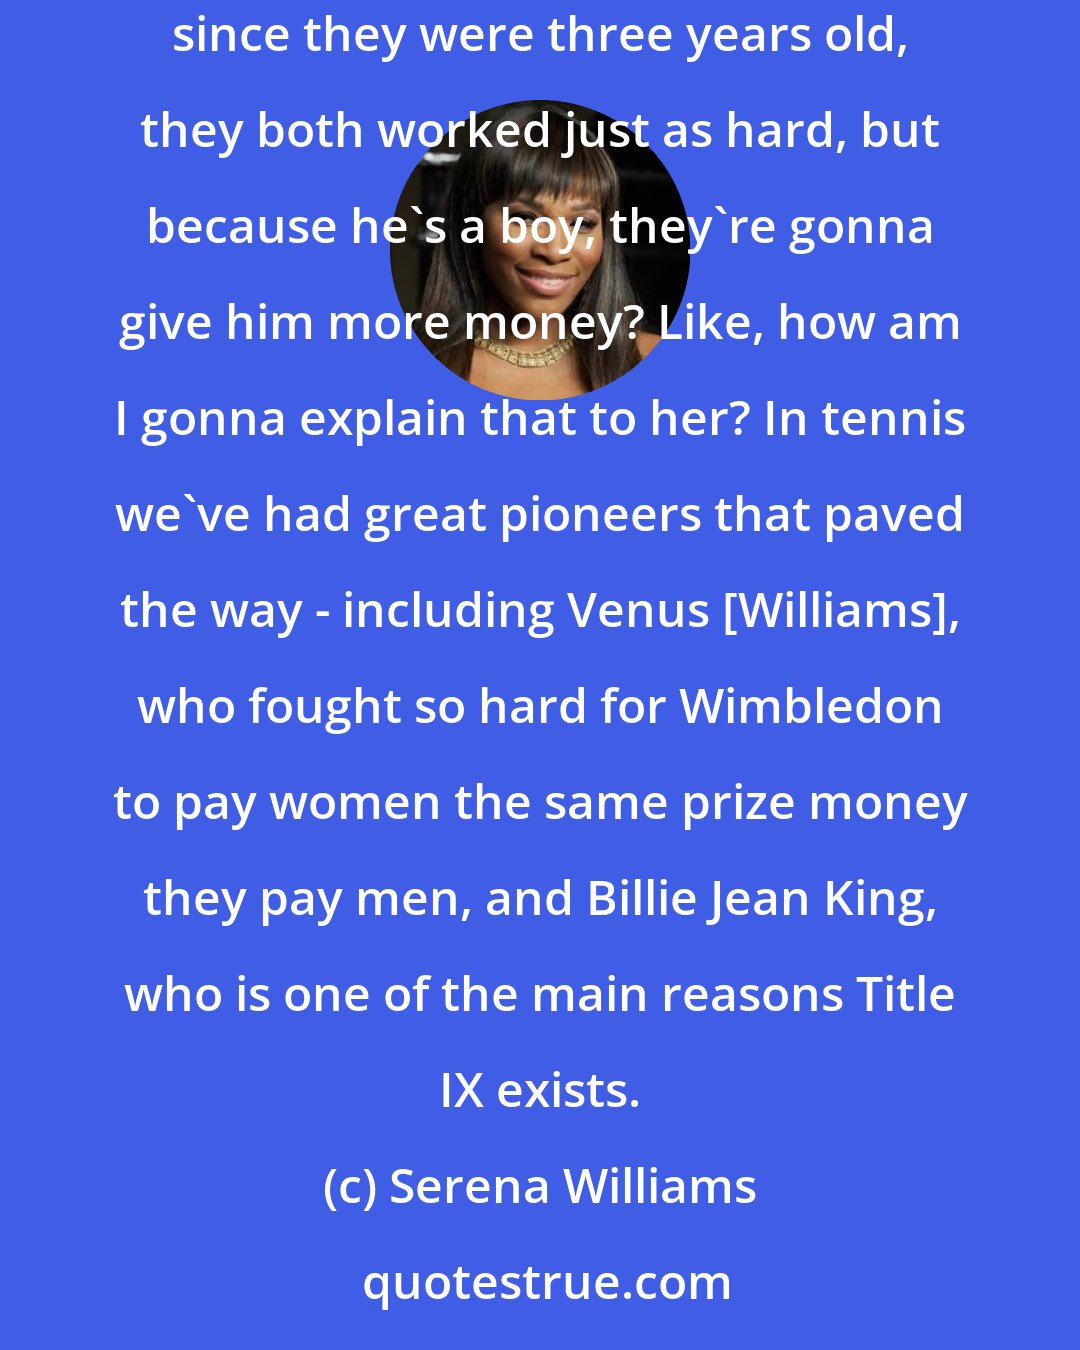 Serena Williams: Will I have to explain to my daughter that her brother is gonna make more money doing the exact same job because he's a man? If they both played sports since they were three years old, they both worked just as hard, but because he's a boy, they're gonna give him more money? Like, how am I gonna explain that to her? In tennis we've had great pioneers that paved the way - including Venus [Williams], who fought so hard for Wimbledon to pay women the same prize money they pay men, and Billie Jean King, who is one of the main reasons Title IX exists.